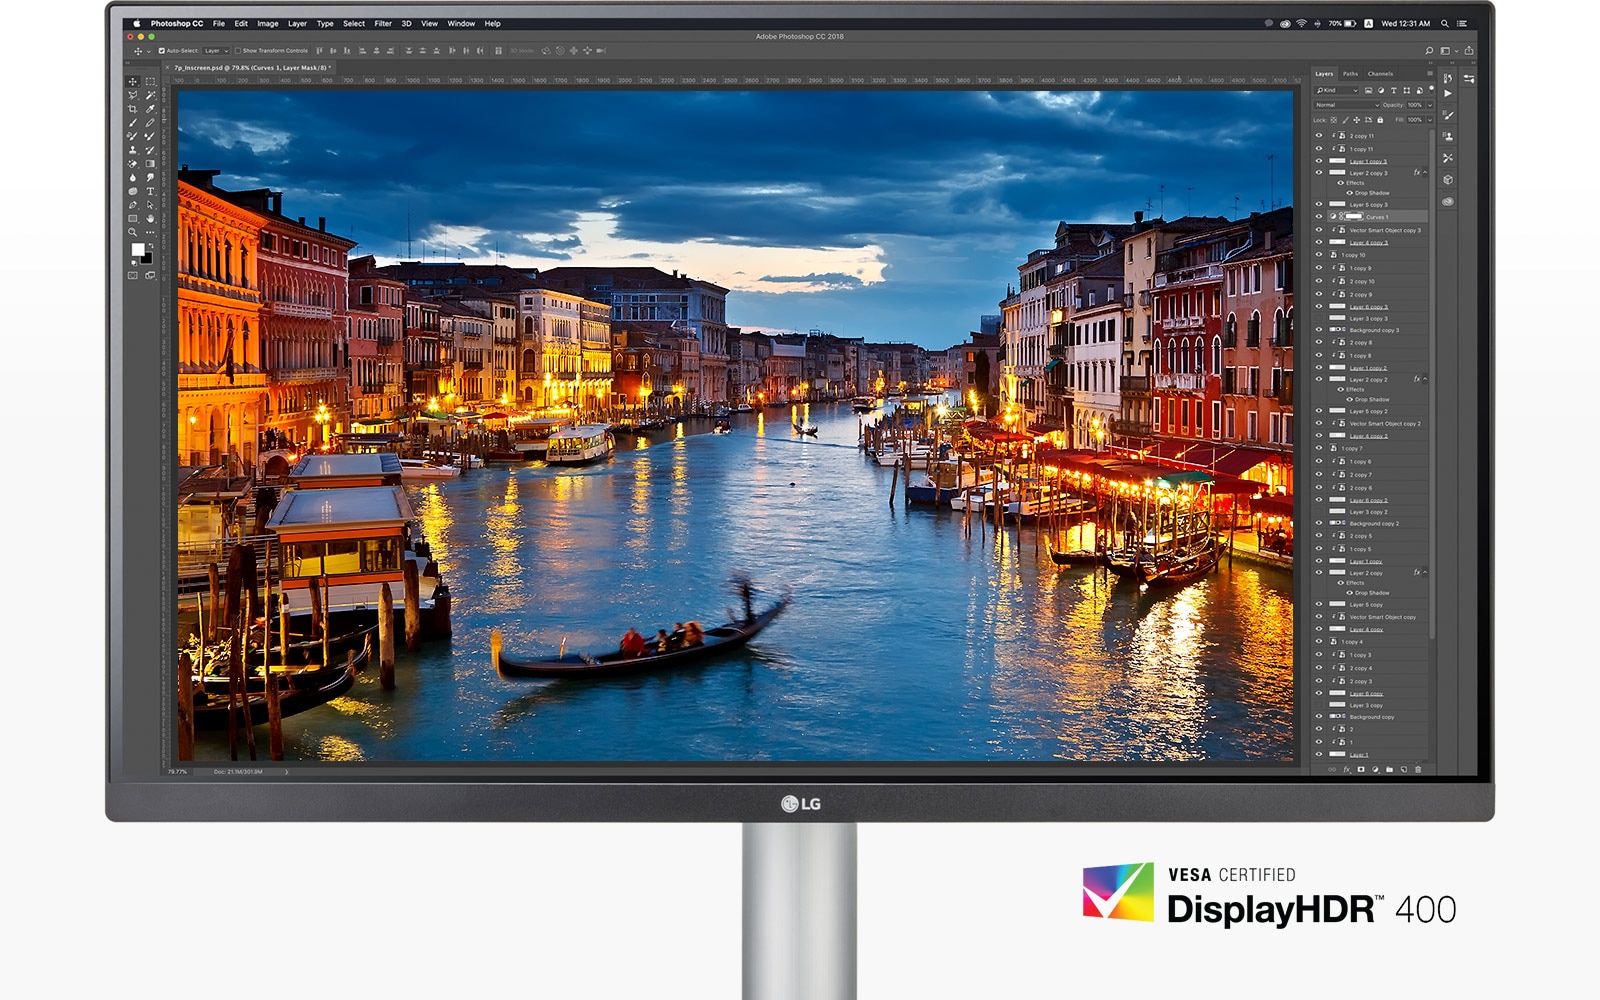 The monitor with VESA DisplayHDR™ 400 enabling dramatic visual immersion